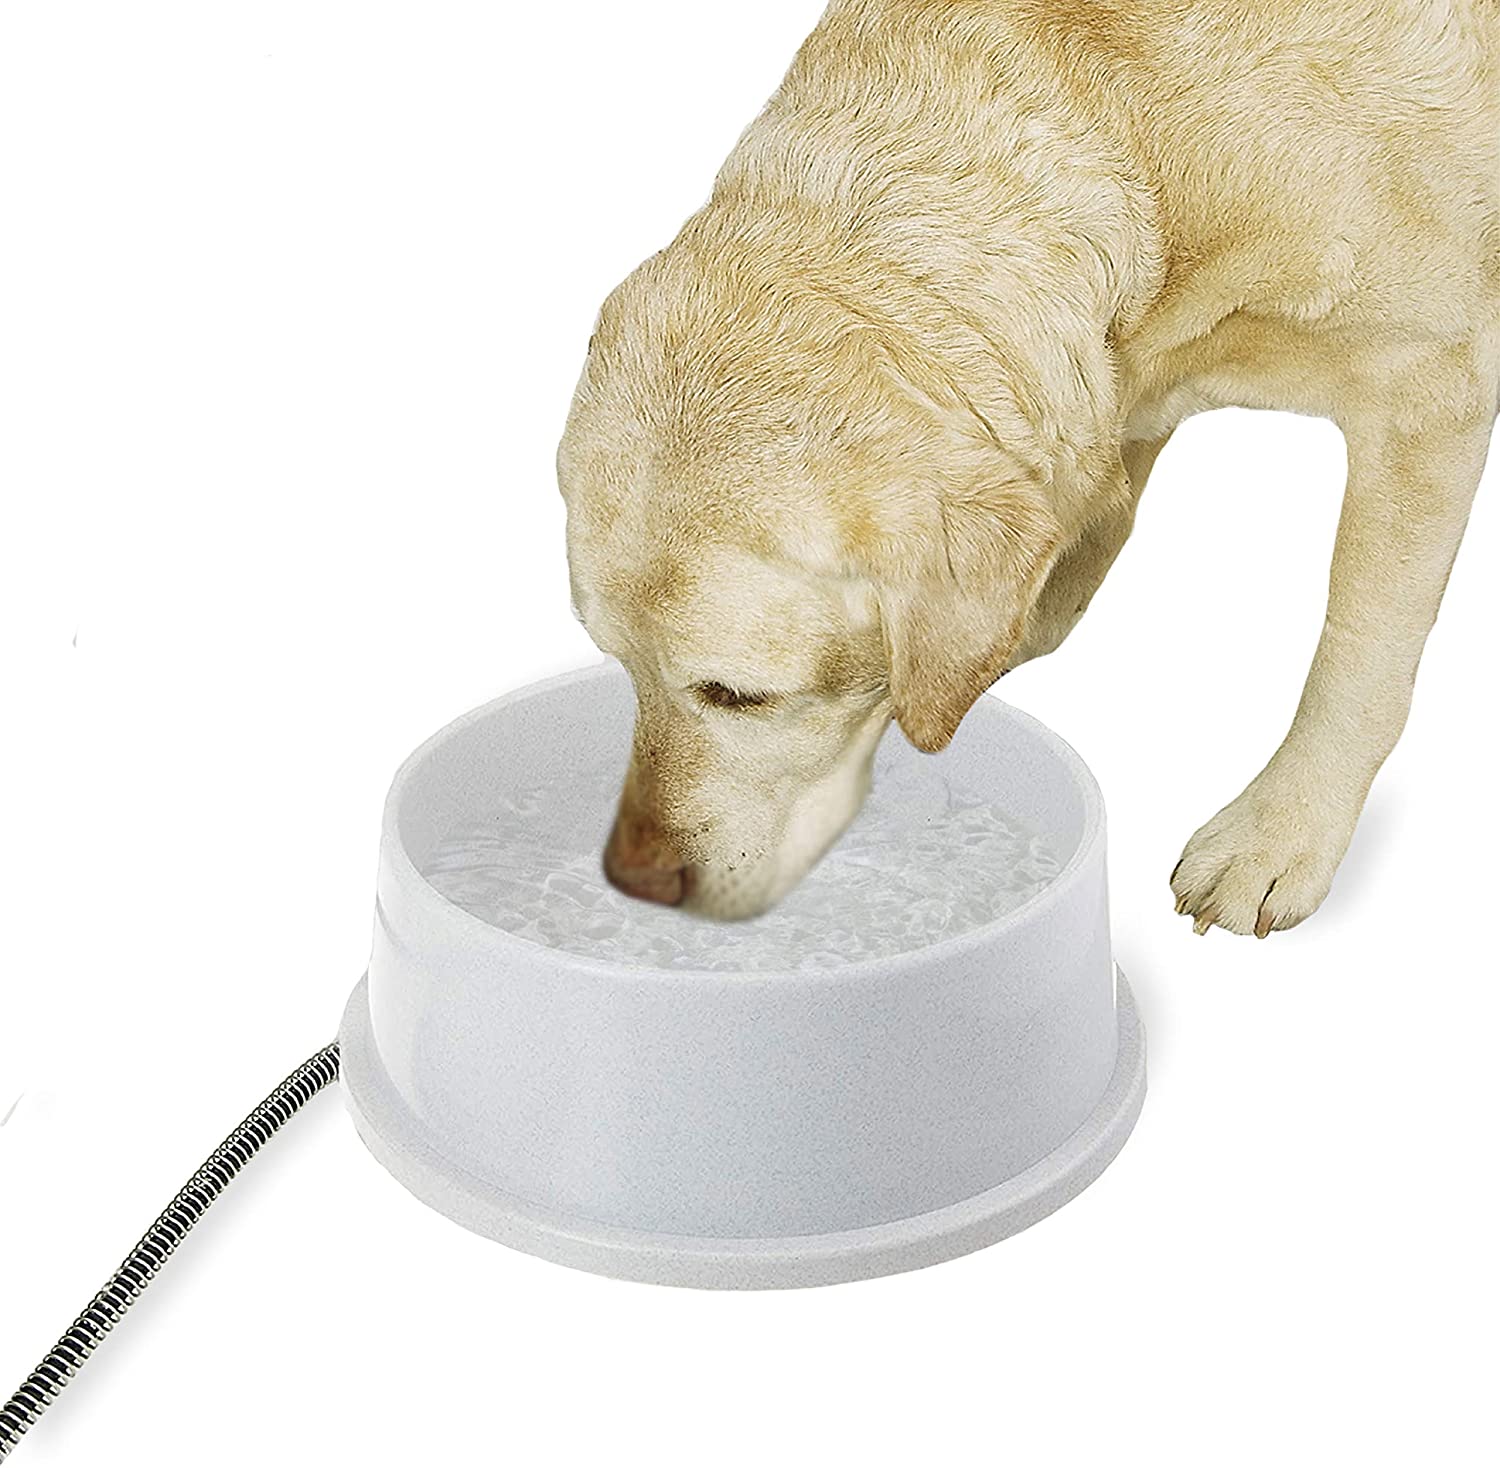 K&H Pet Products Thermal-Bowl Cat & Dog Outdoor Heated Water Bowl